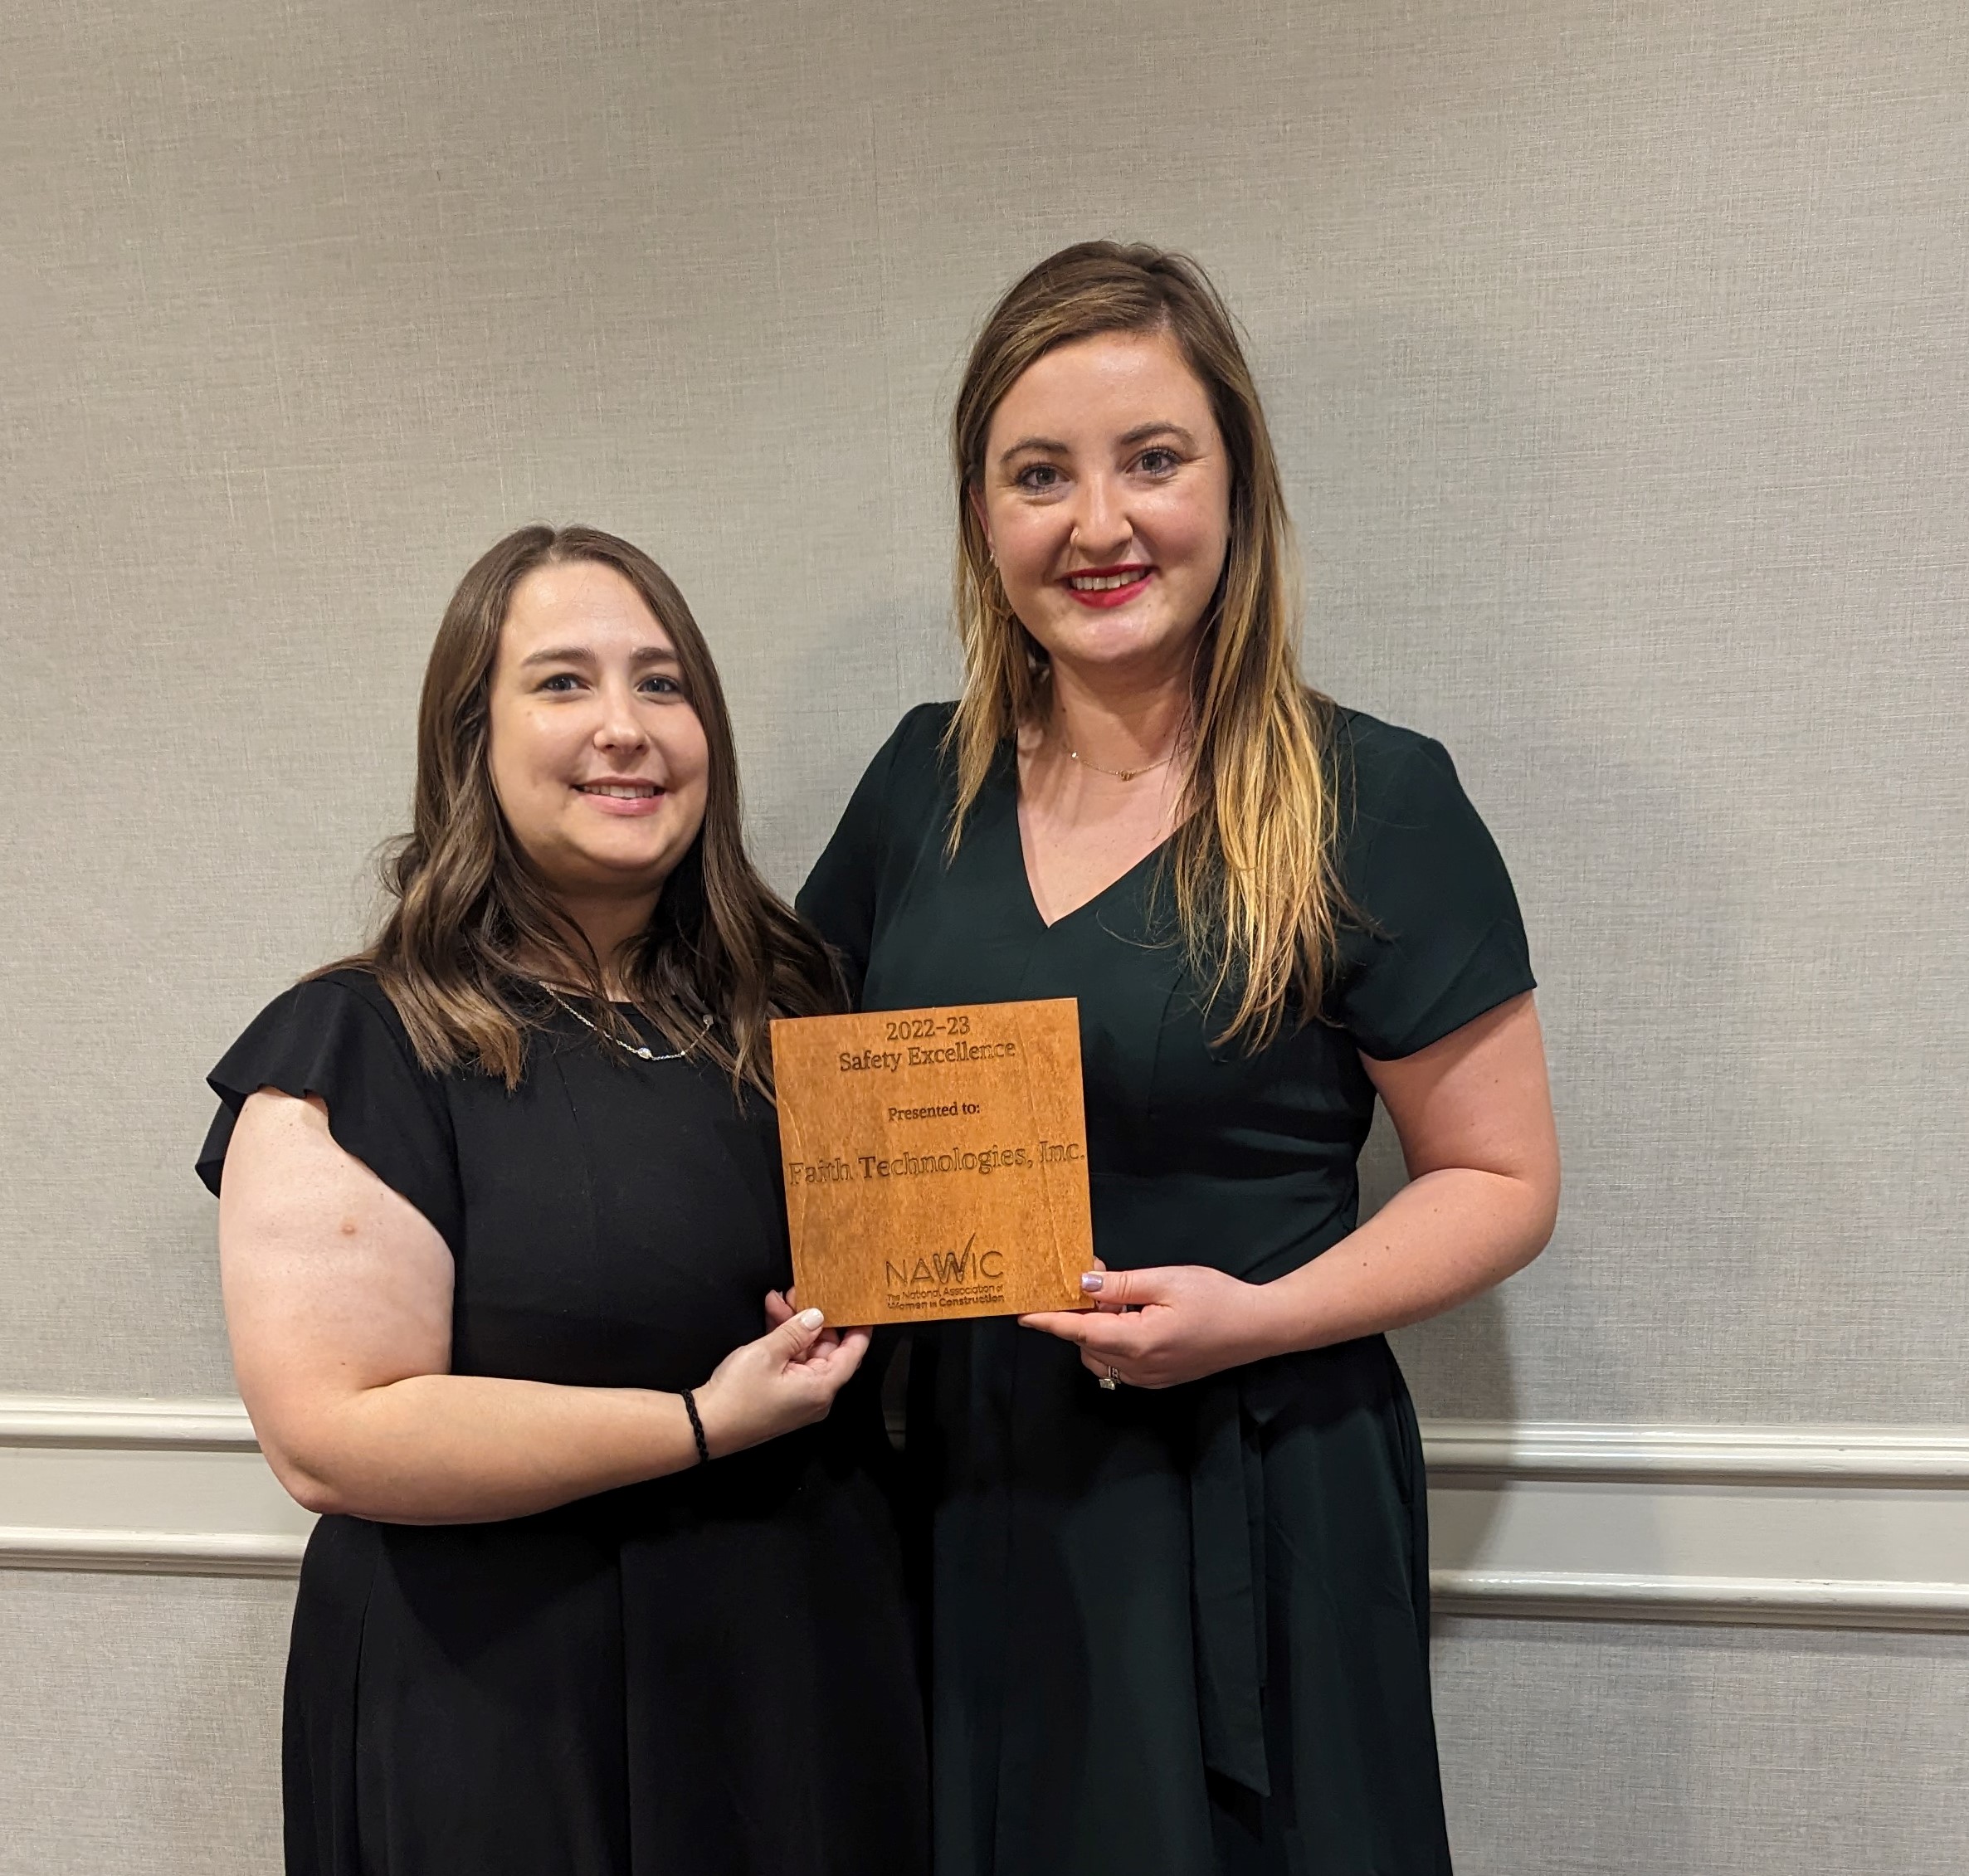 Sara Hutchcraft and Kelsey Harlow, Faith Technologies Incorporated team members, accept FTI’s first place 2022-2023 Safety Excellence Award from the National Association of Women in Construction. Sara is the immediate past president of the NAWIC Greater Kansas City Chapter #100.